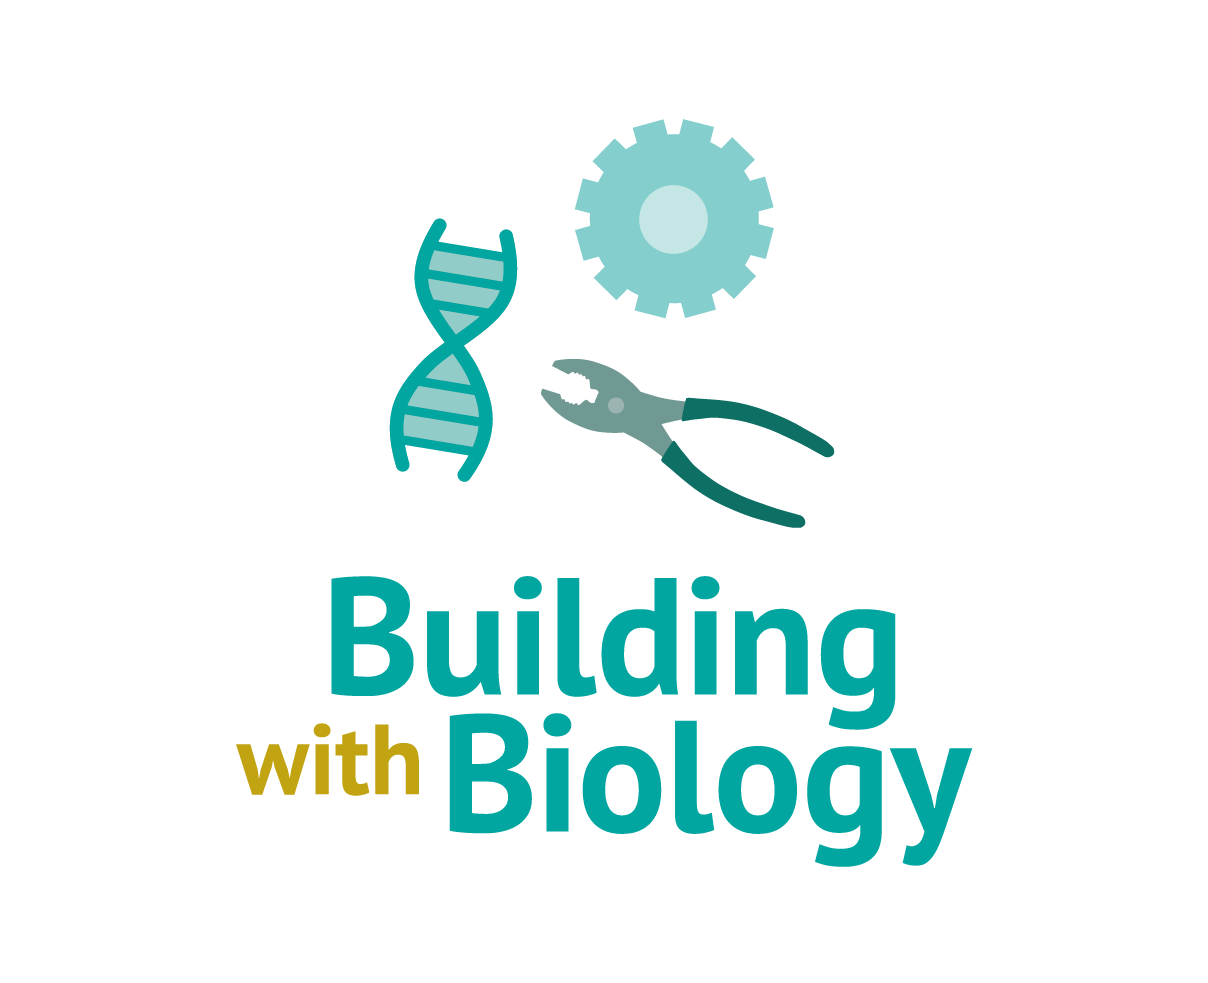 Building with Biology full color squared logo featuring illustrations of DNA, a gear and a set of pliers